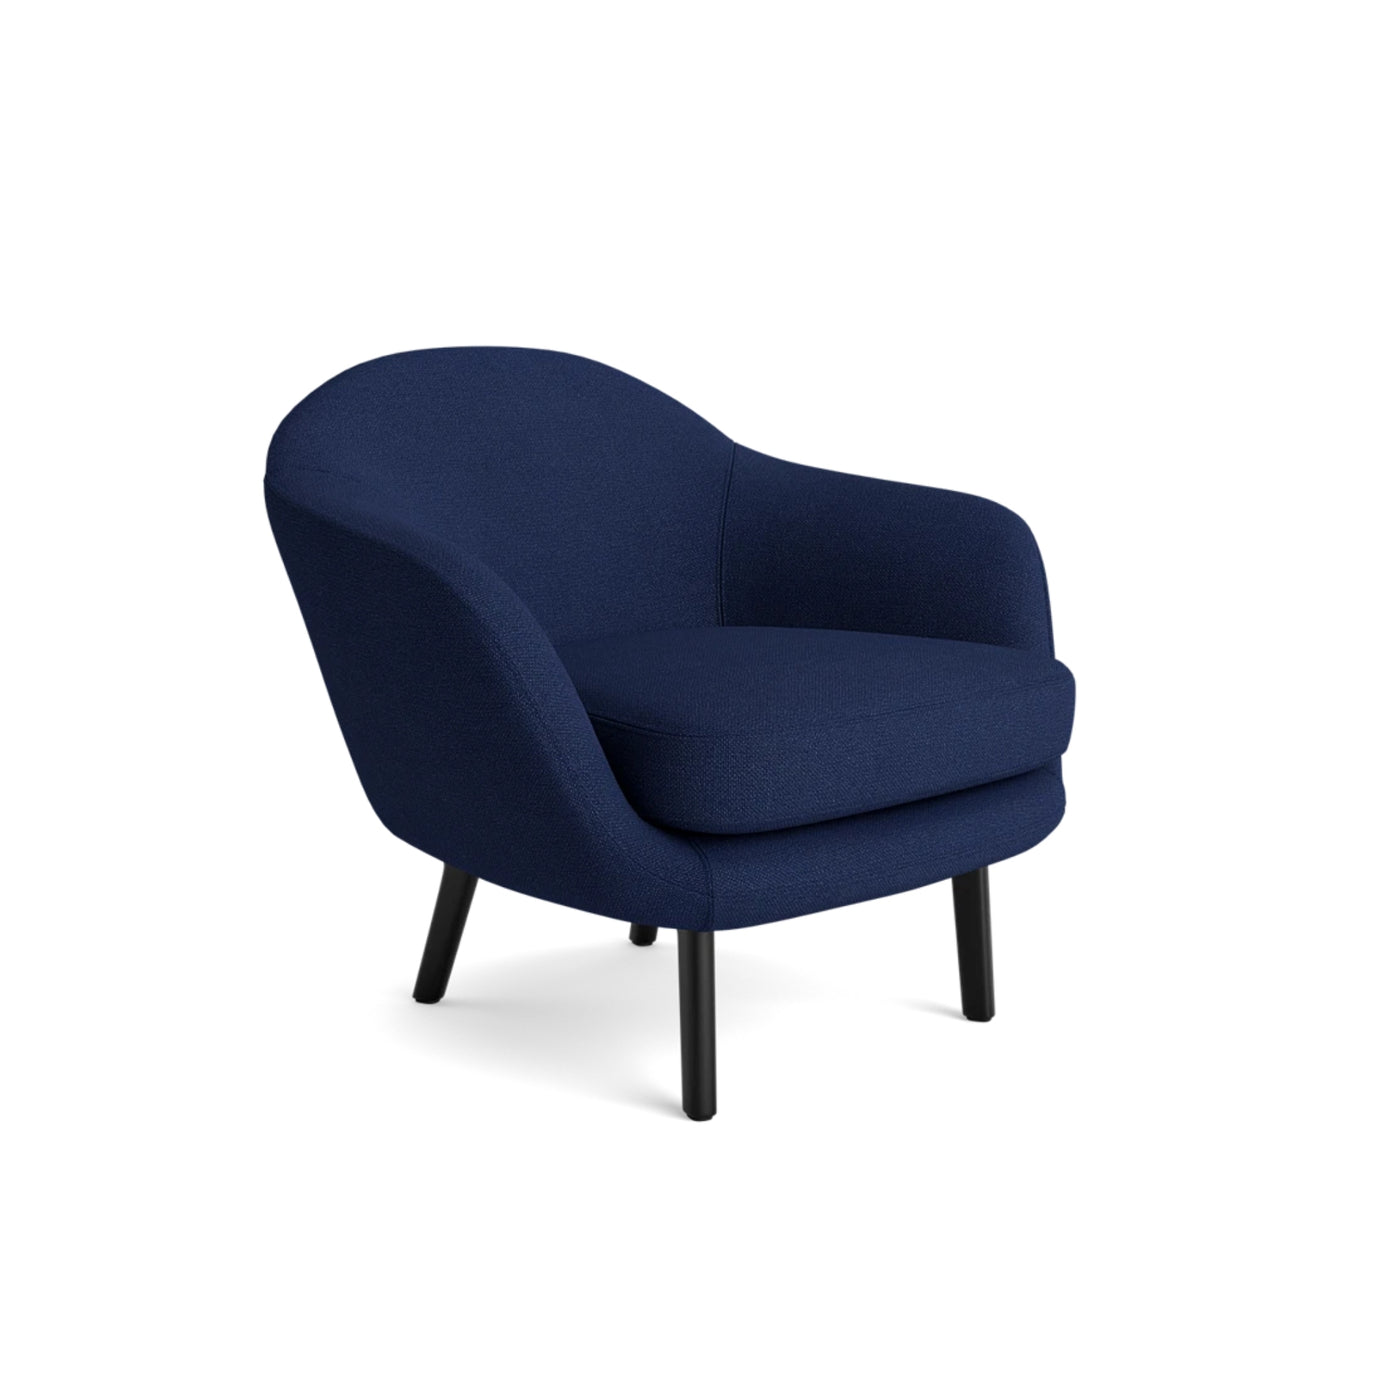 Normann Copenhagen Sum Armchair. Made to order at someday designs. #colour_hallingdal-764